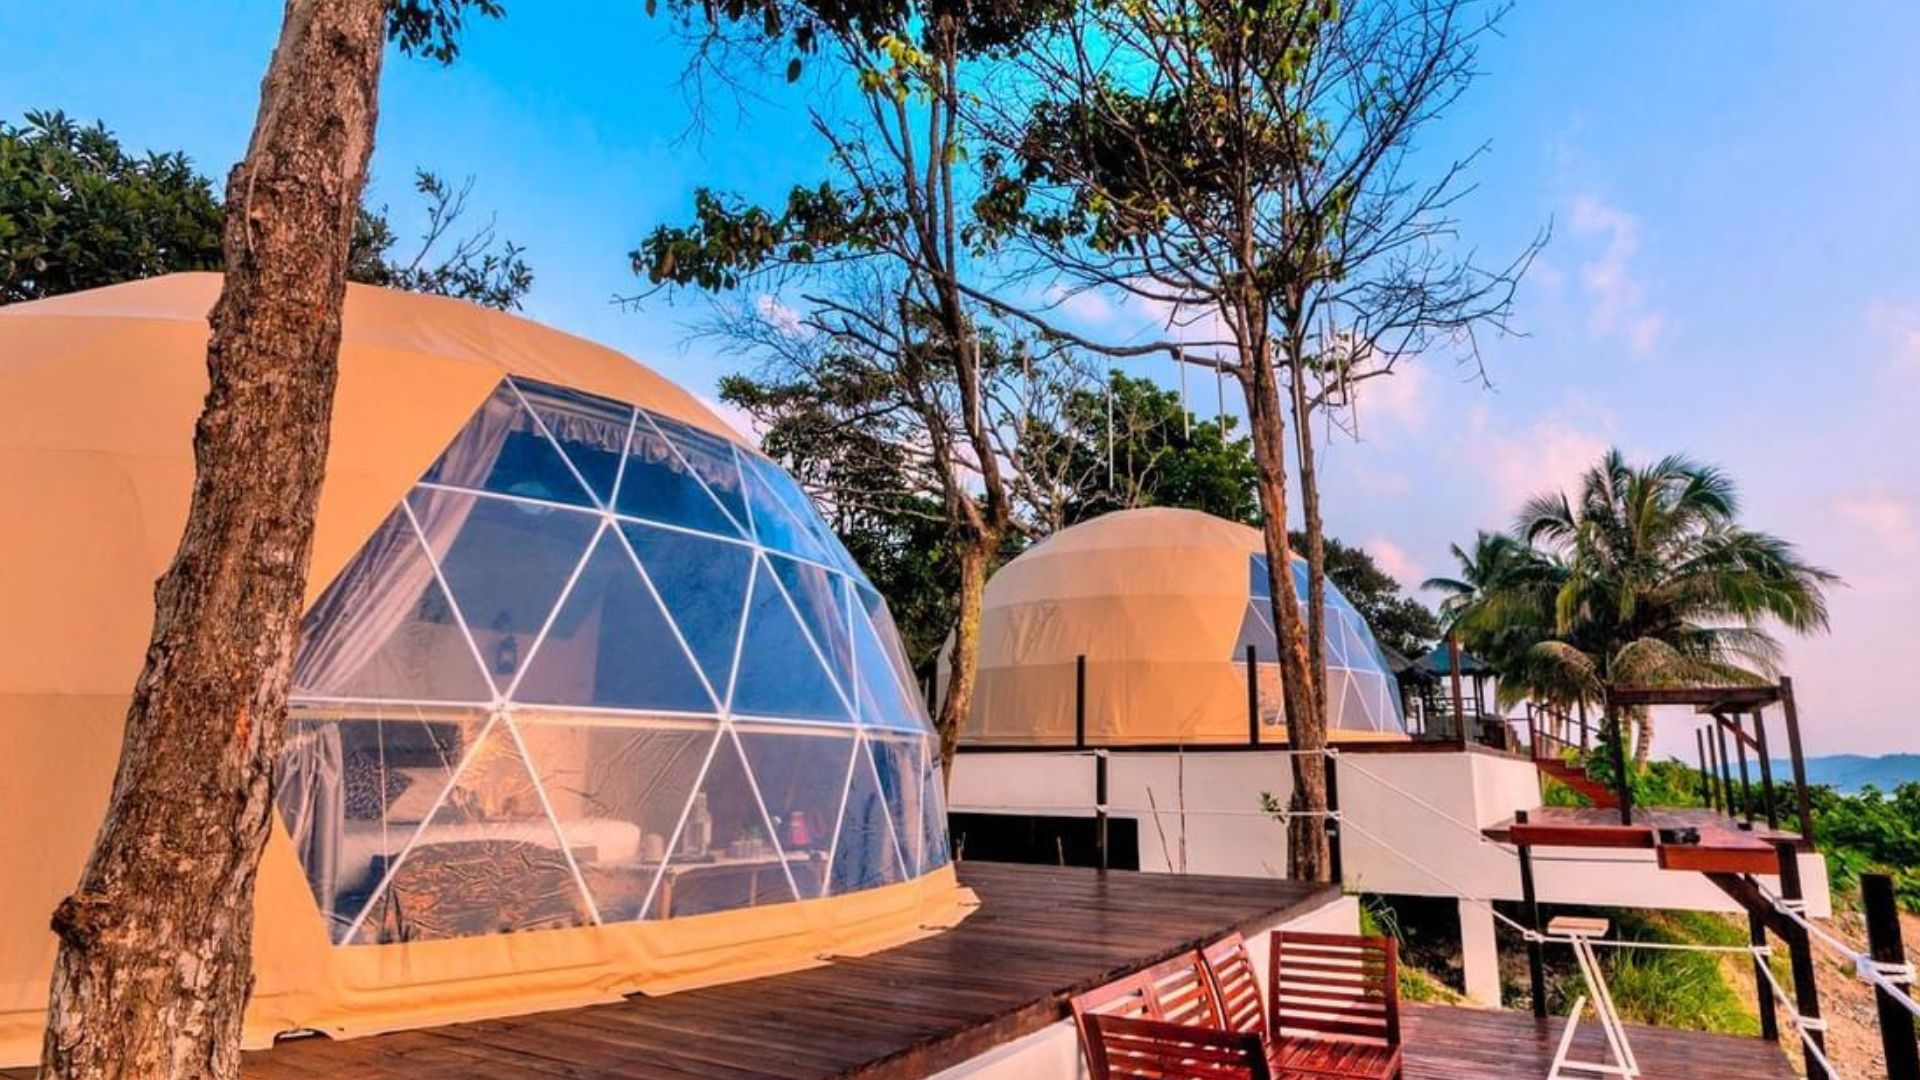 10 Picturesque Glamping Resorts In Kerala For an Insta-worthy Holiday!